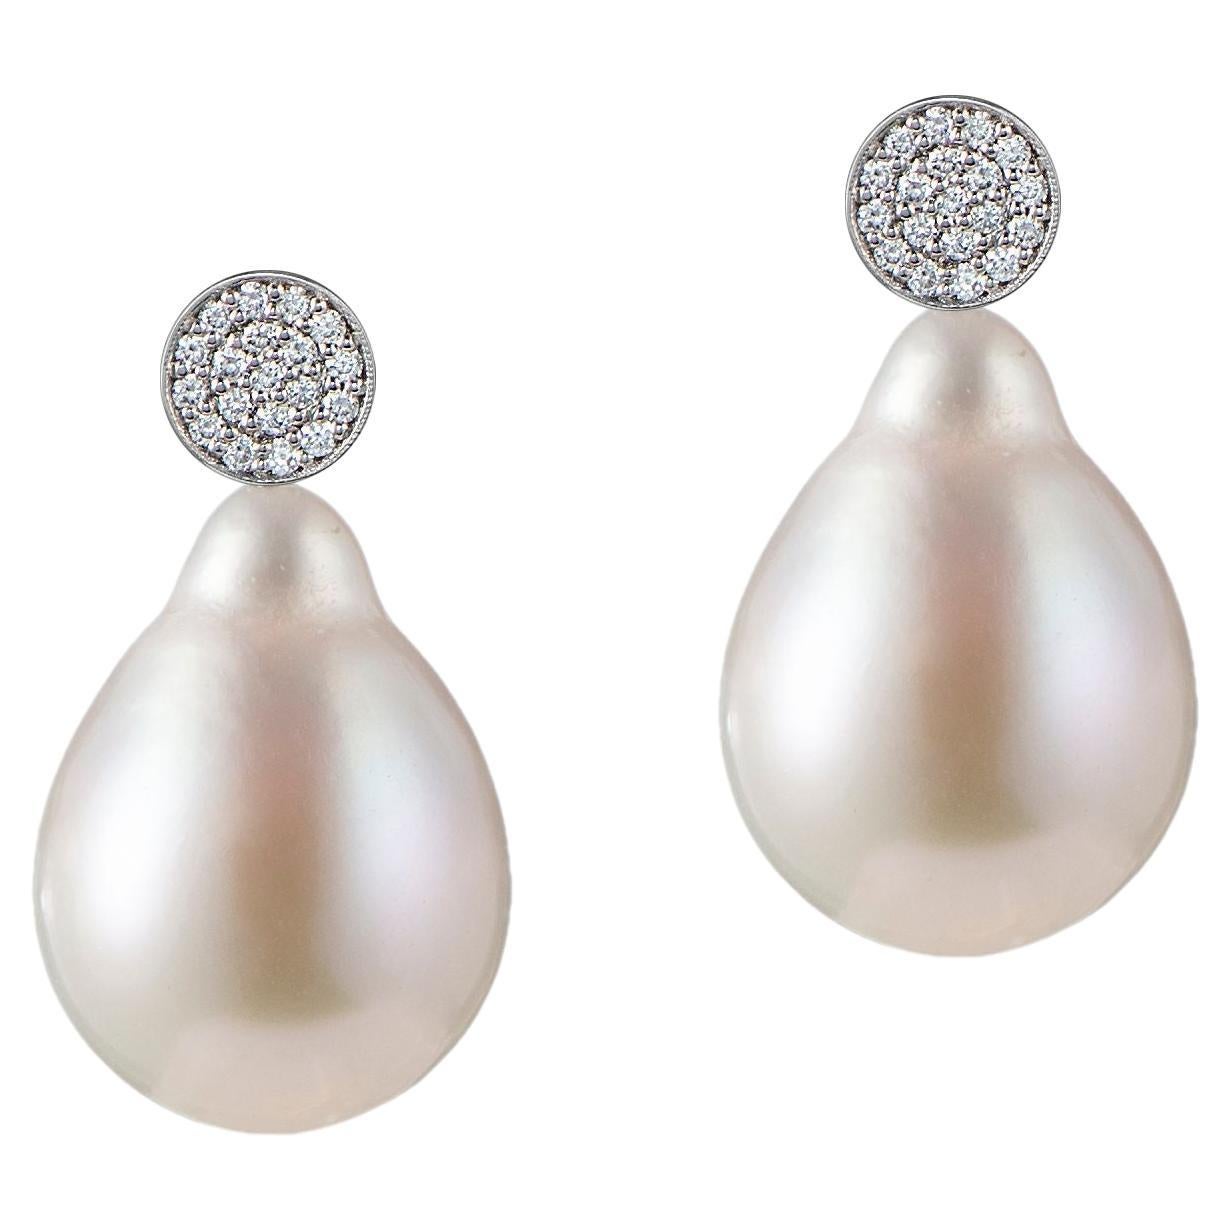 Diamond Micropave Earrings with Removable Drop Pearls, 18K Gold For Sale